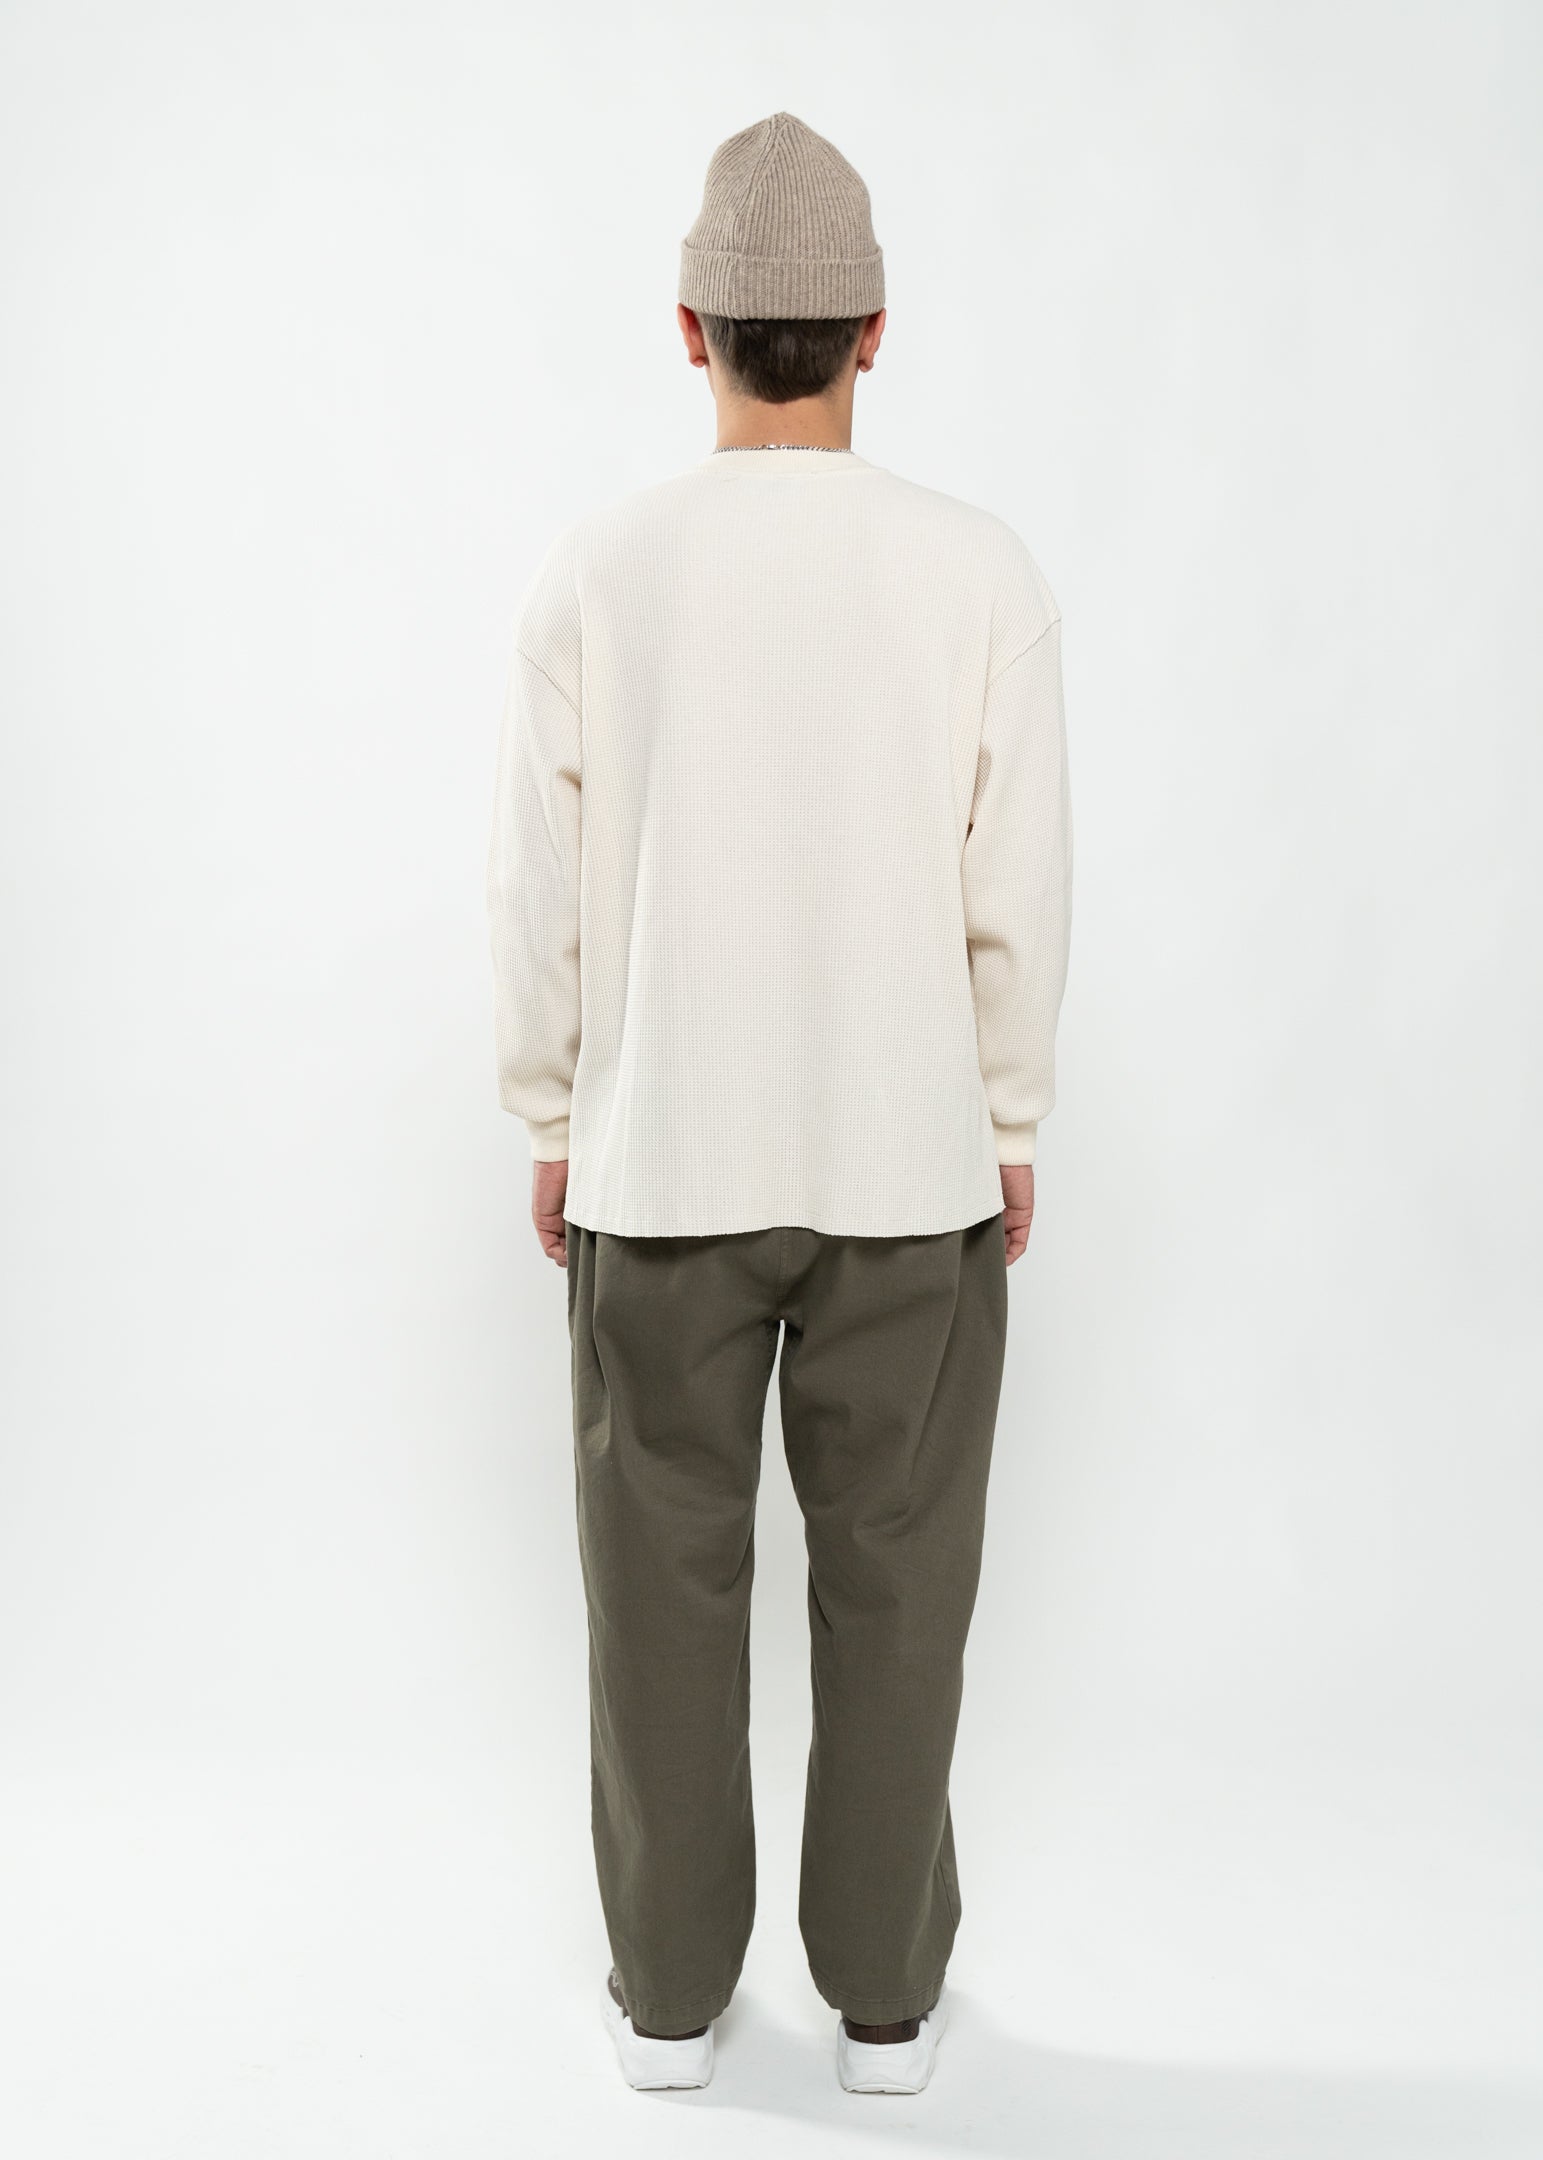 Flowers for Society waffle longsleeve off white back view worn by model Ben standing